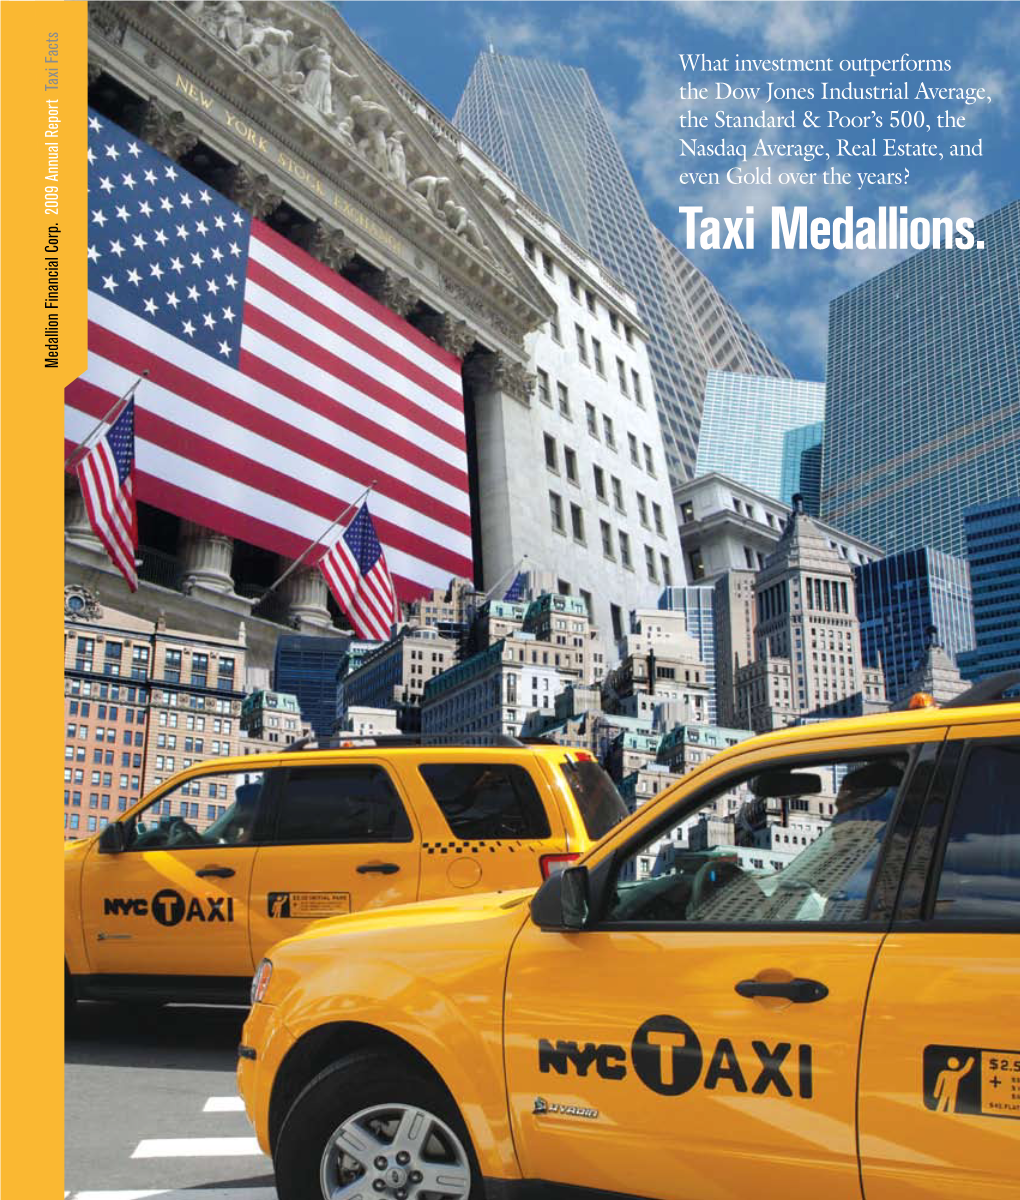 Taxi Medallions. $1.04 Billion We Believe the Continued Rise in Taxi Medallion Prices Indicates the Strength of That Market, Even During at Year End